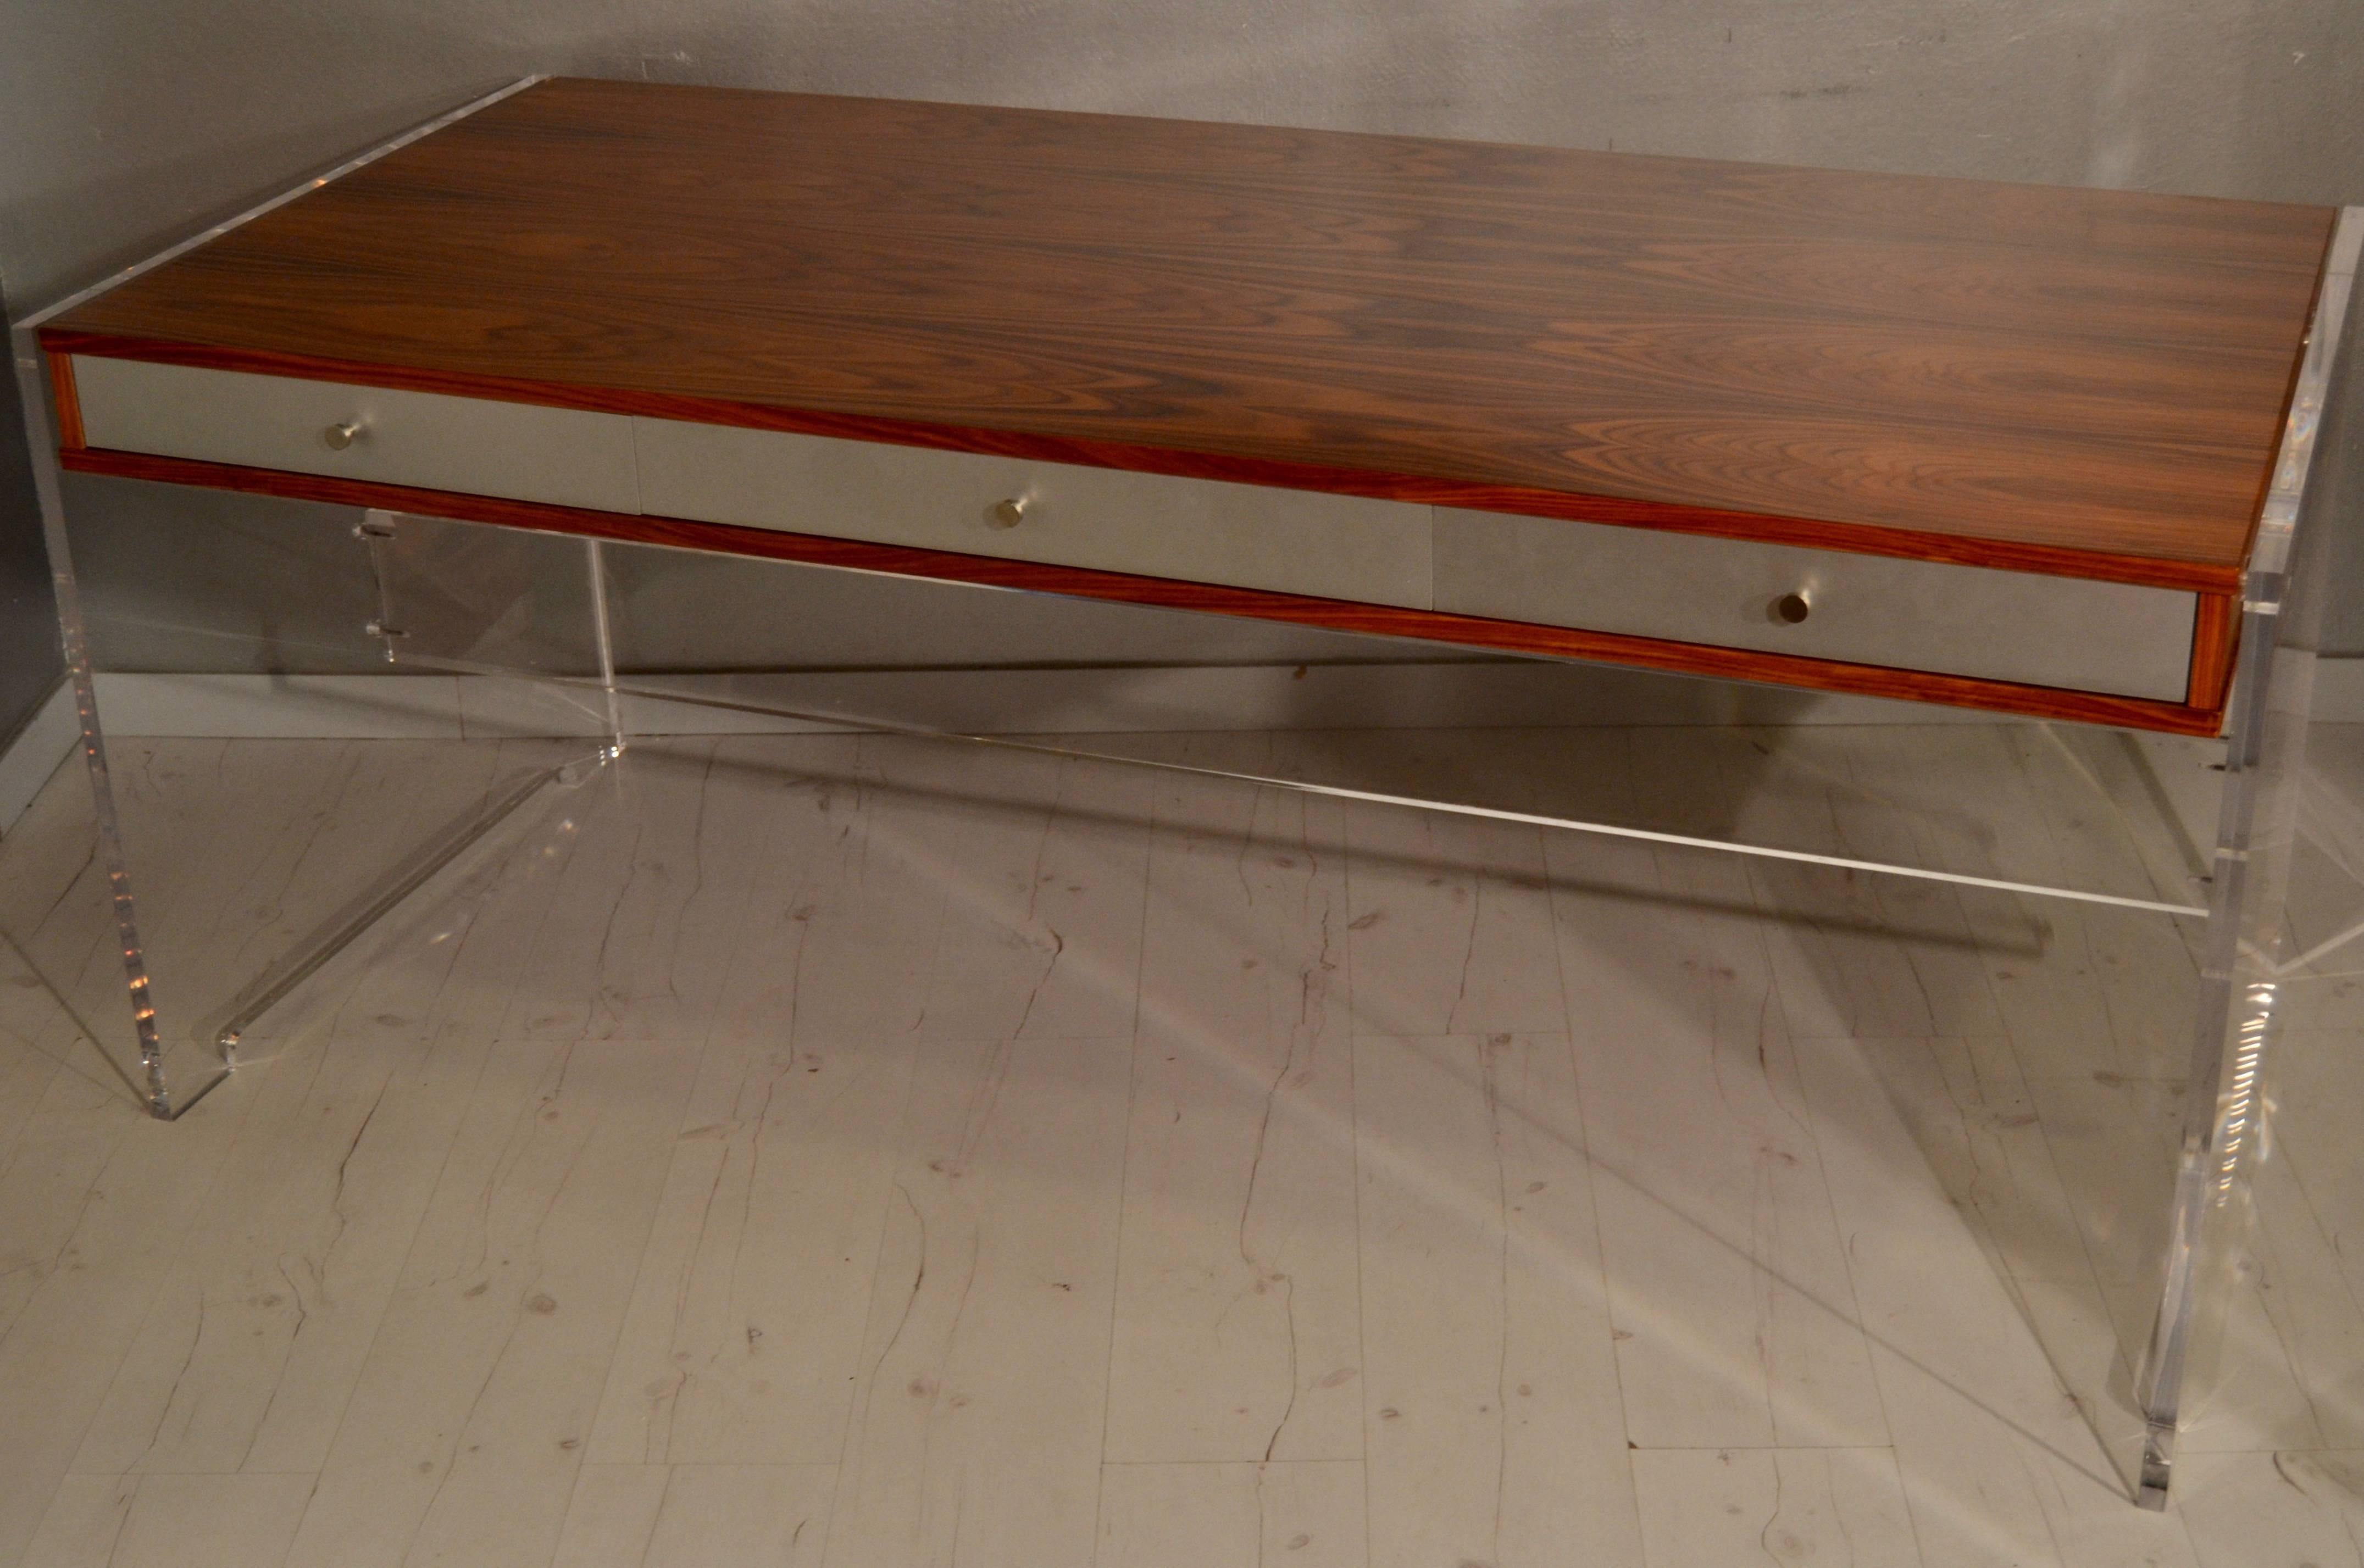 Danish Poul Norreklit Desk in Rosewood and Lucite